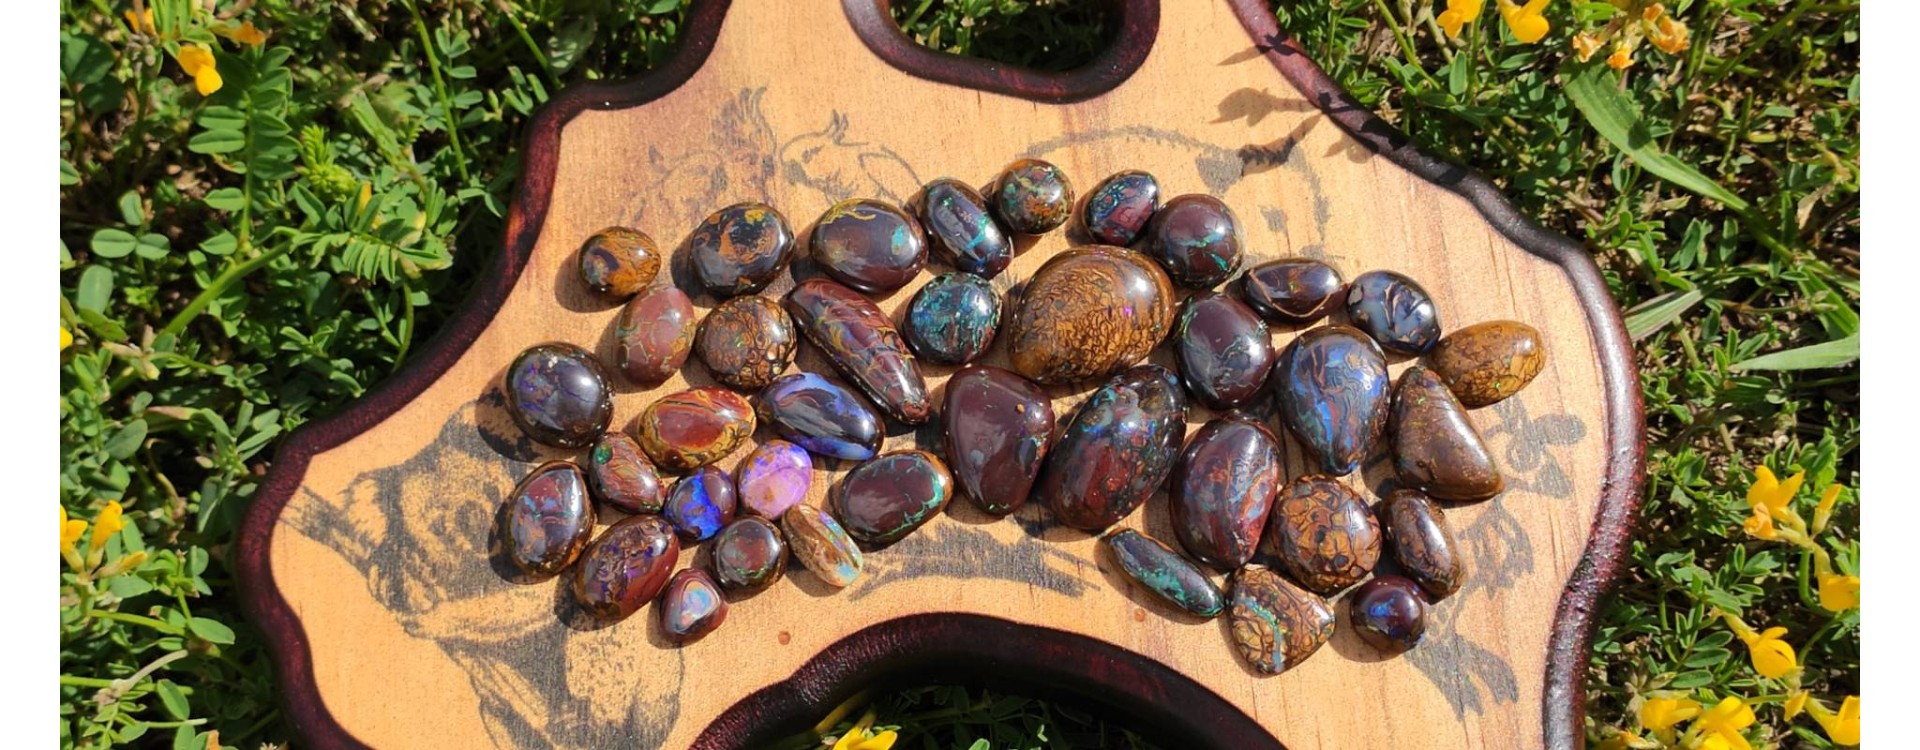 Opals of Australia, discover the different types of Opals and the Australian deposits